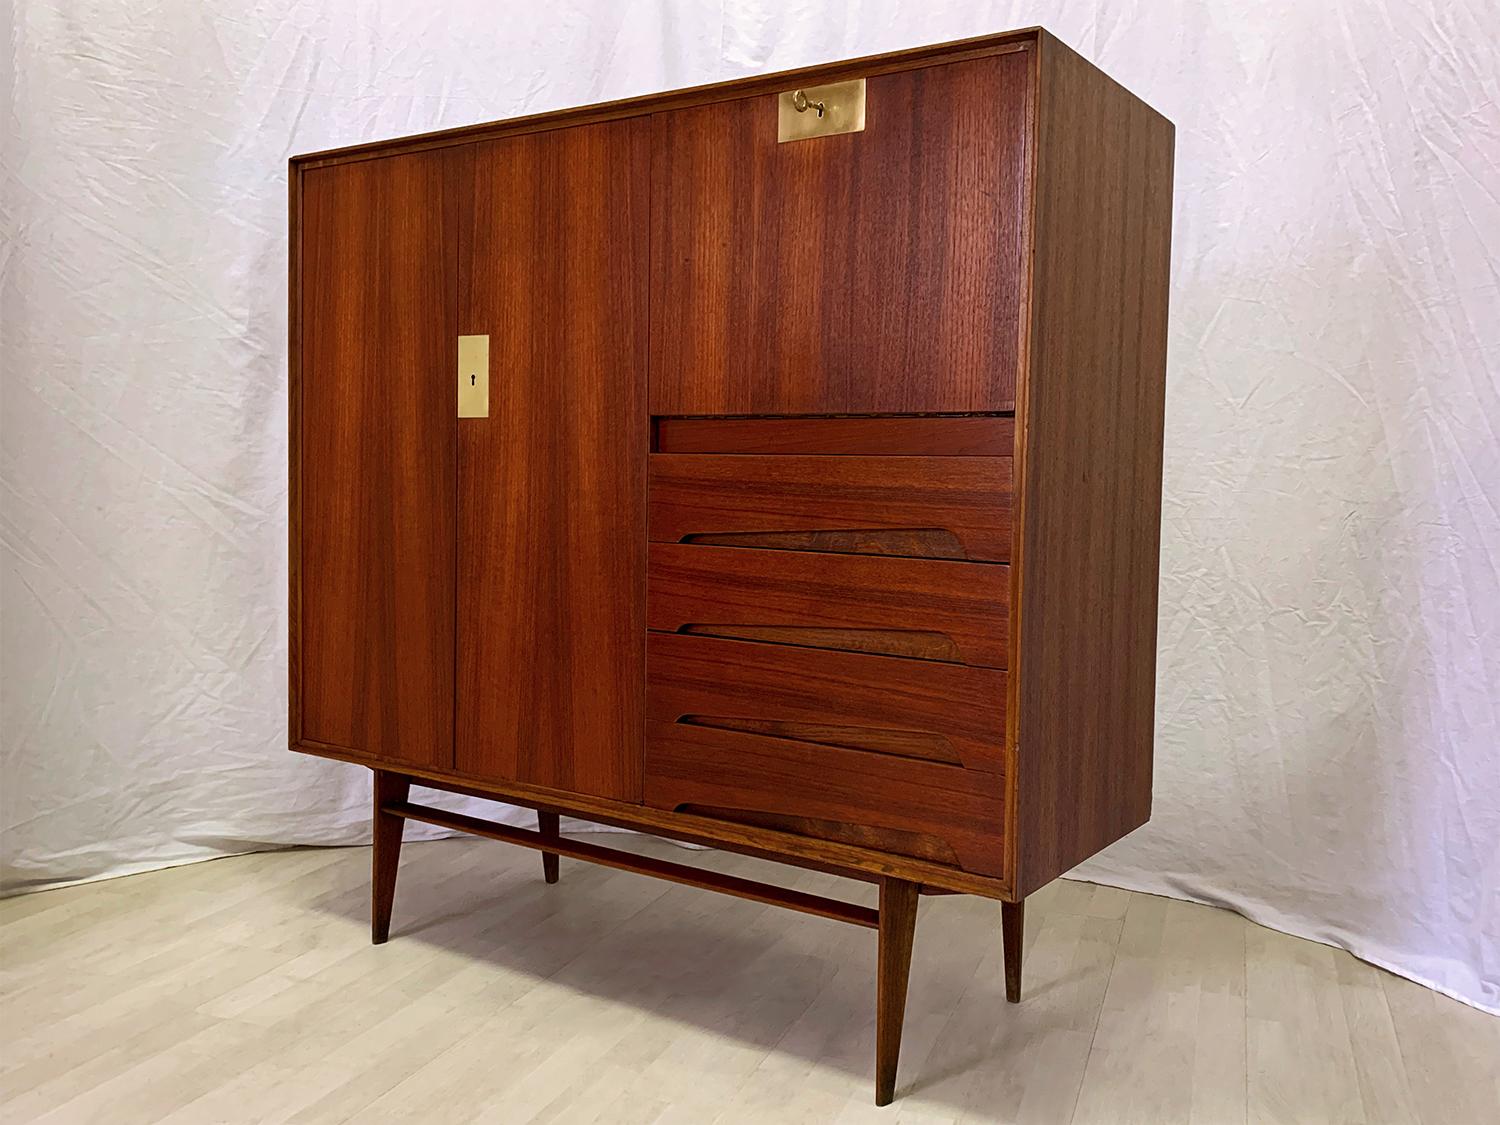 Stunning sideboard crafted with a gorgeous material like as warm teakwood, finished with brass details, and its uniqueness is given by the presence of a drop-leaf door on the right side, that makes it available as a secretaire.
Its doors and